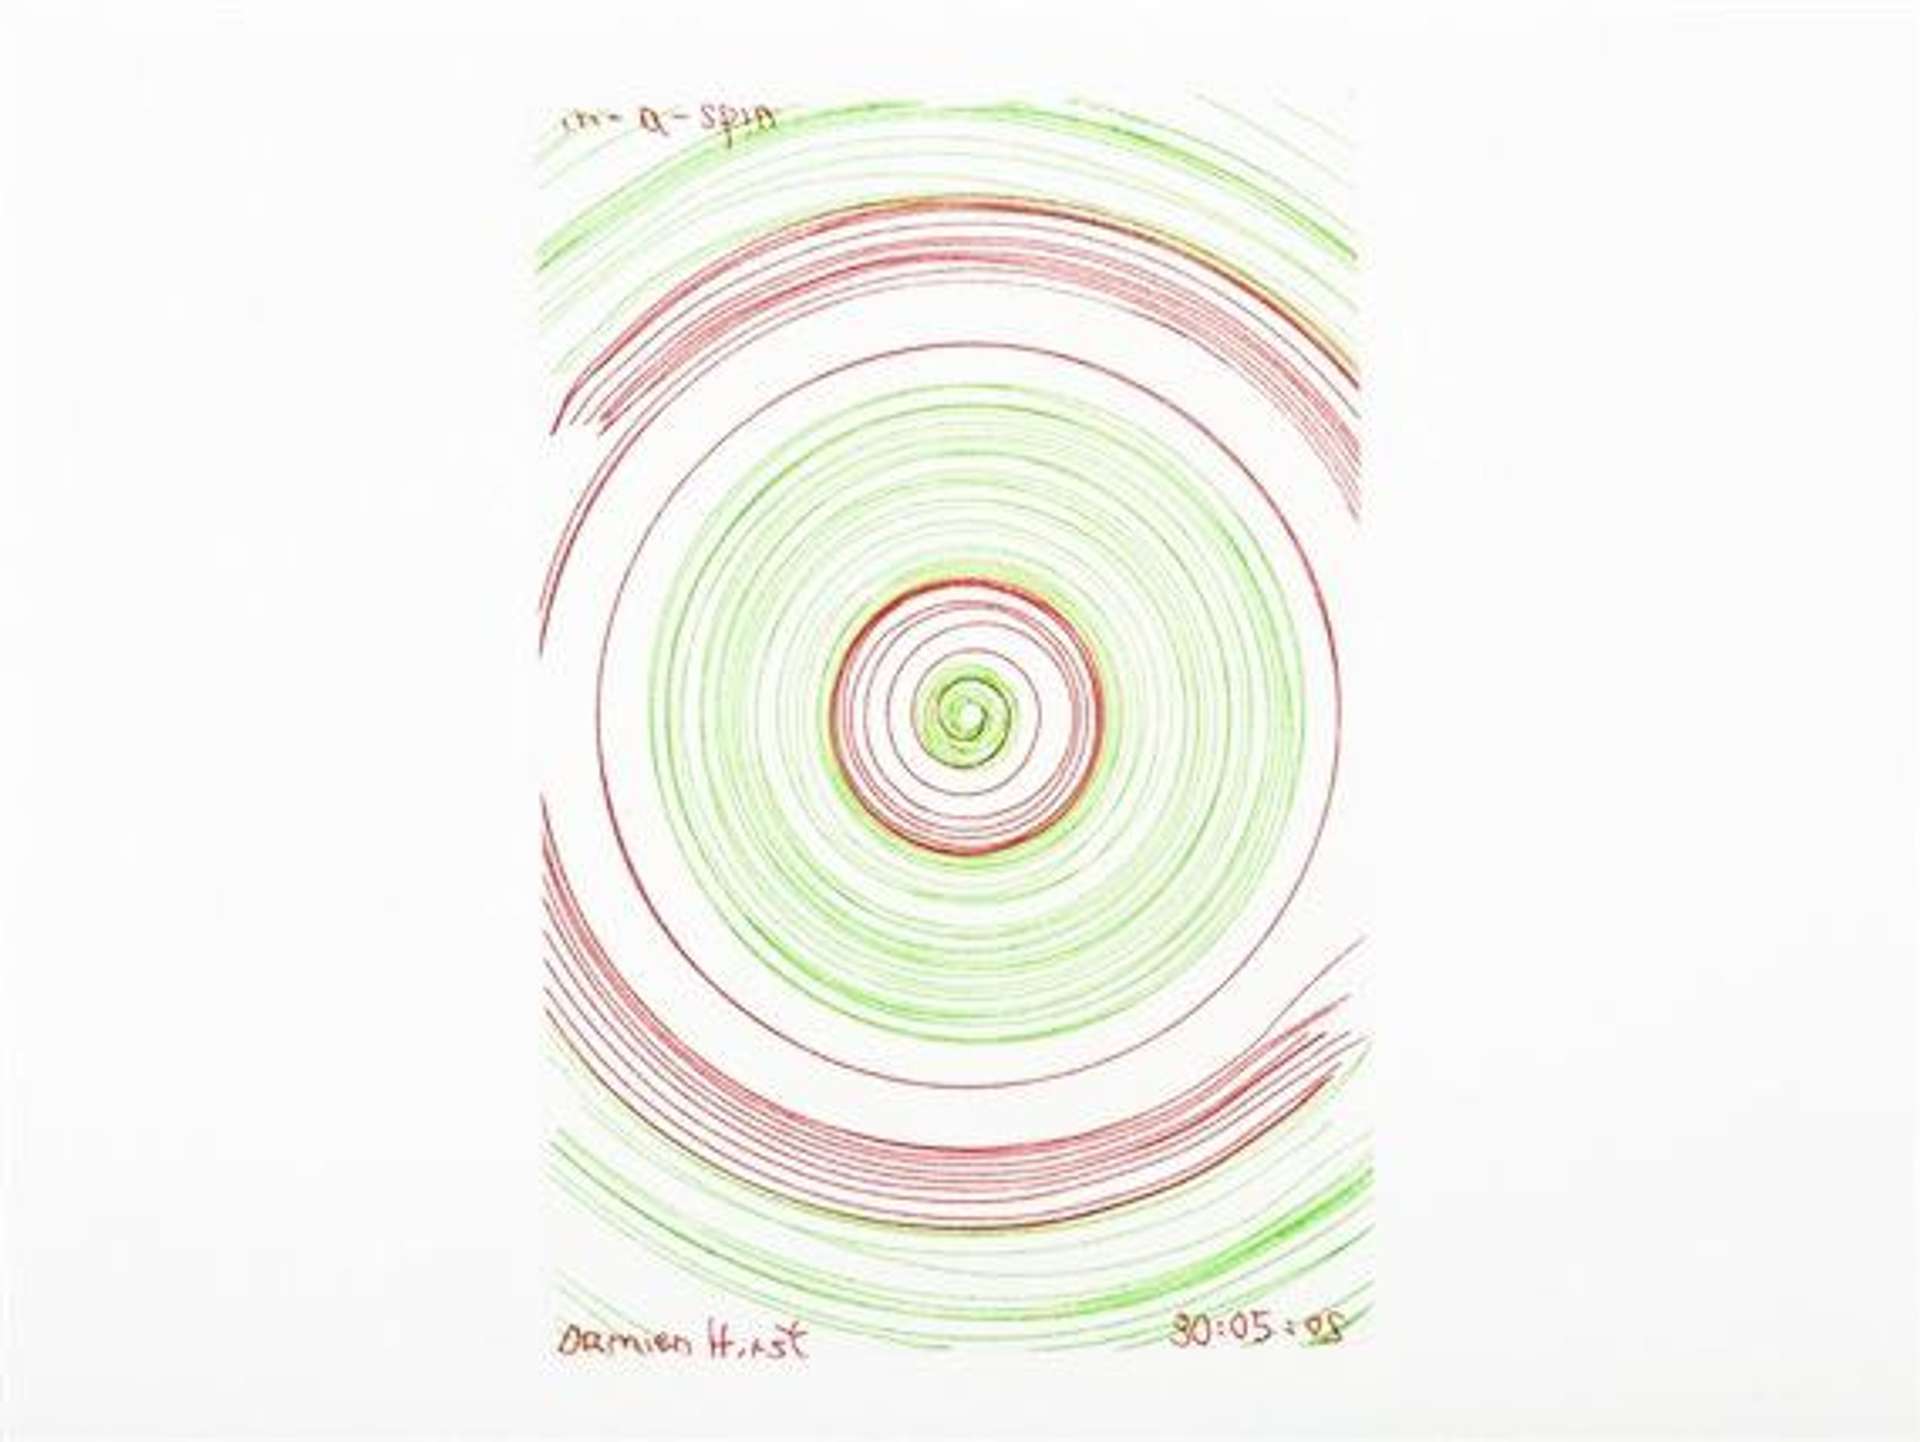 In A Spin - Signed Print by Damien Hirst 2002 - MyArtBroker